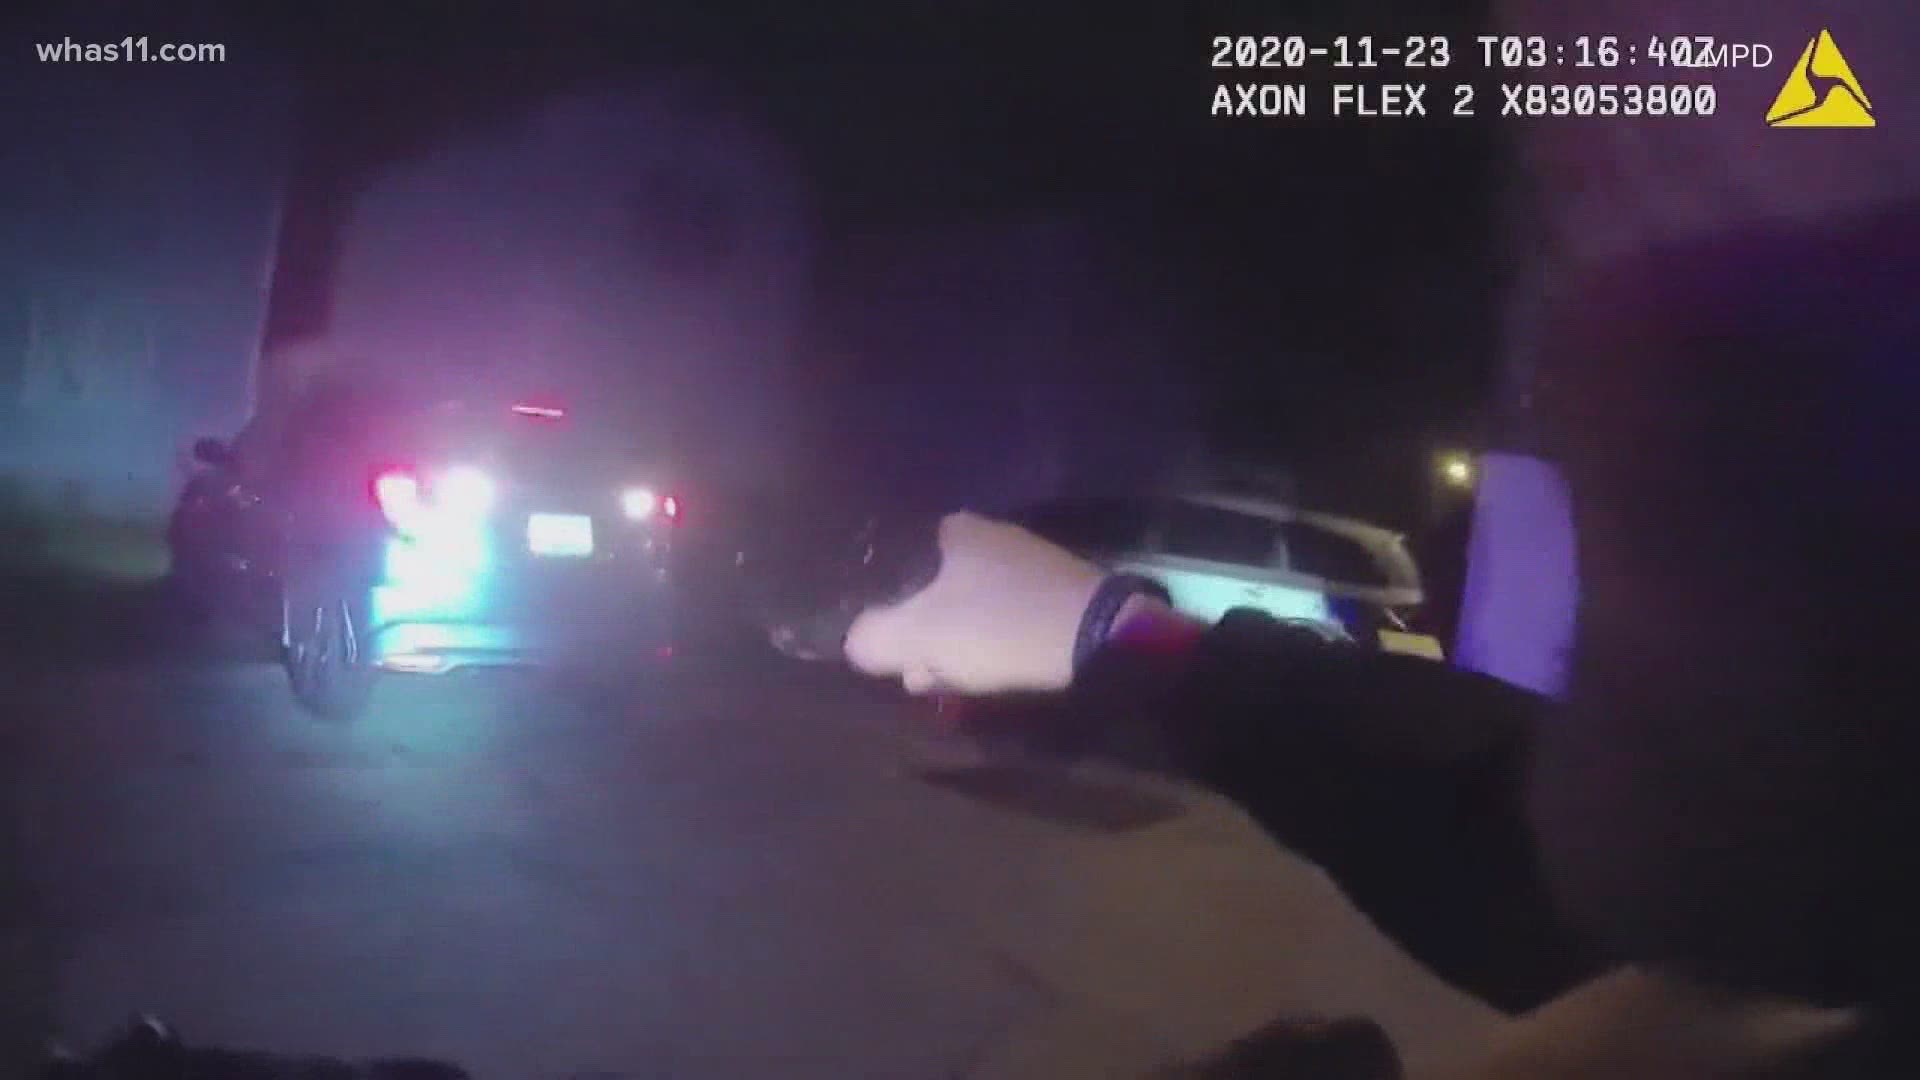 The LMPD body camera video shows the fatal police shooting of a man in the Portland neighborhood on November 22.